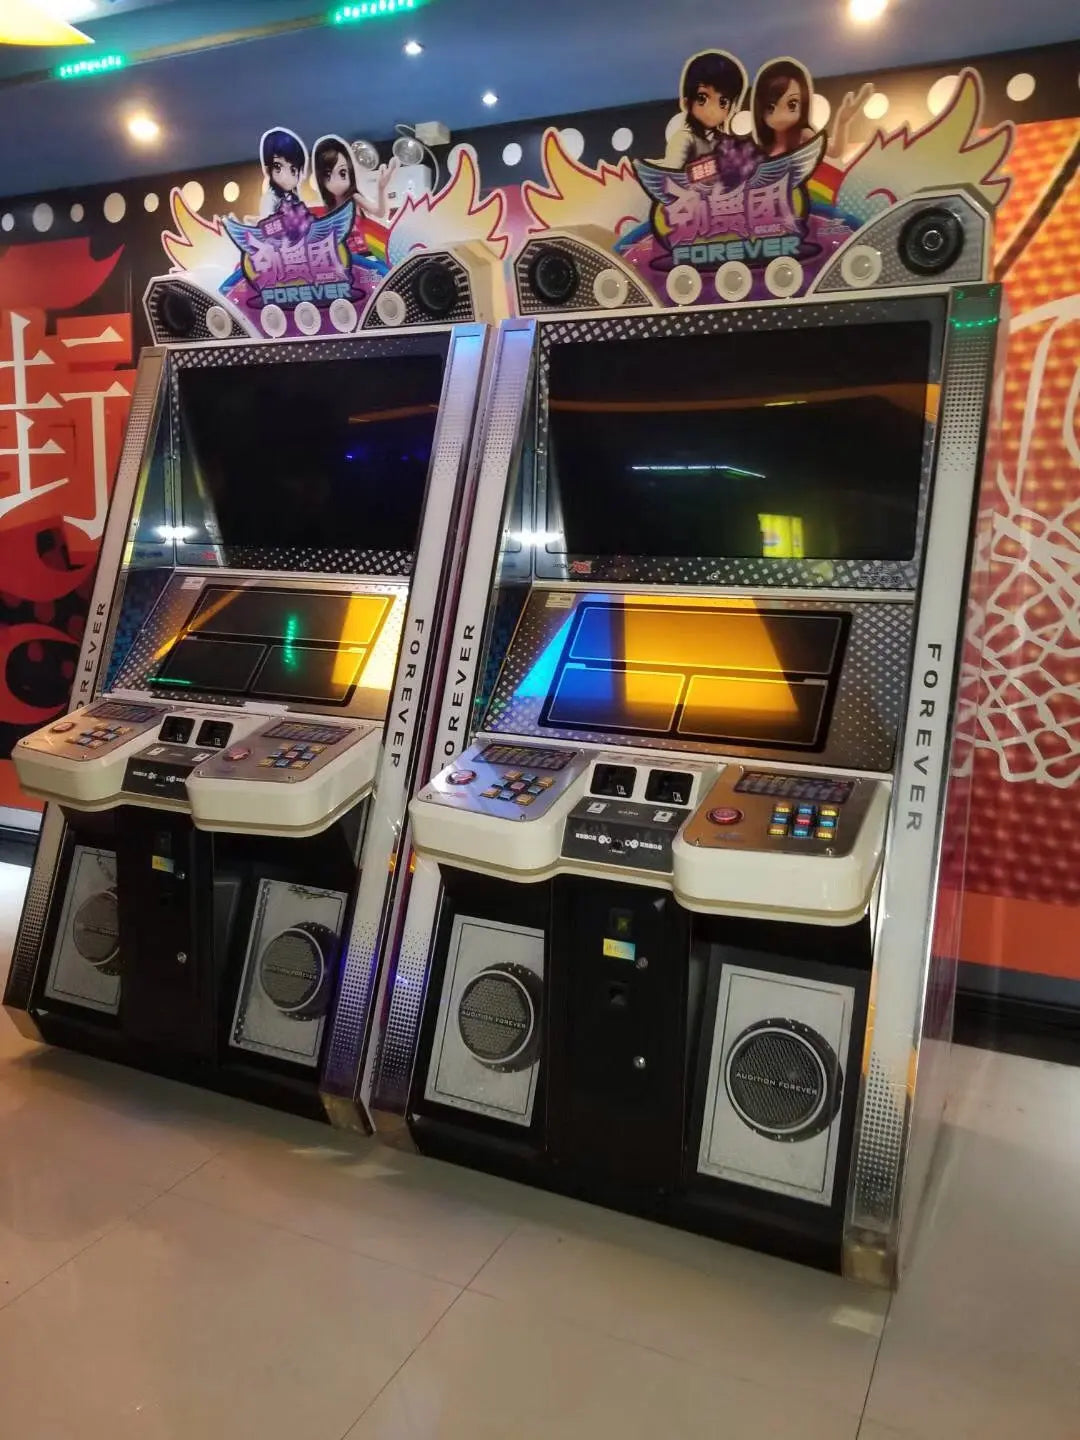 DANCE-FOREVER-Game-Machine-Retro-Amusement-Coin-Operated-Dancing-Arcade-USED-Tomy-Arcade